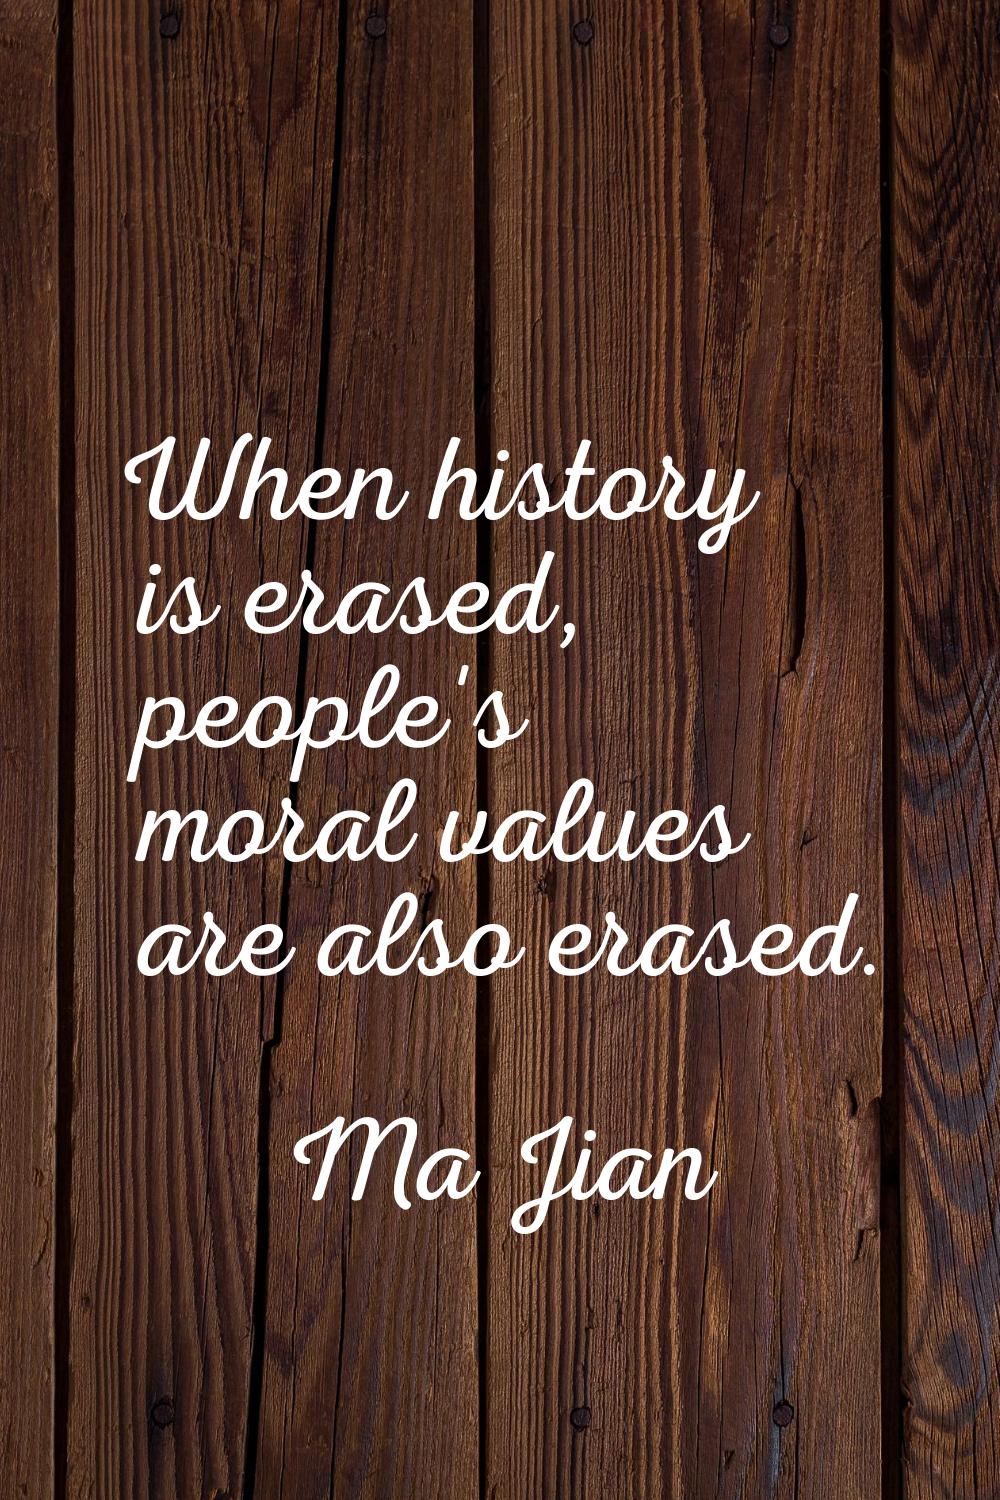 When history is erased, people's moral values are also erased.